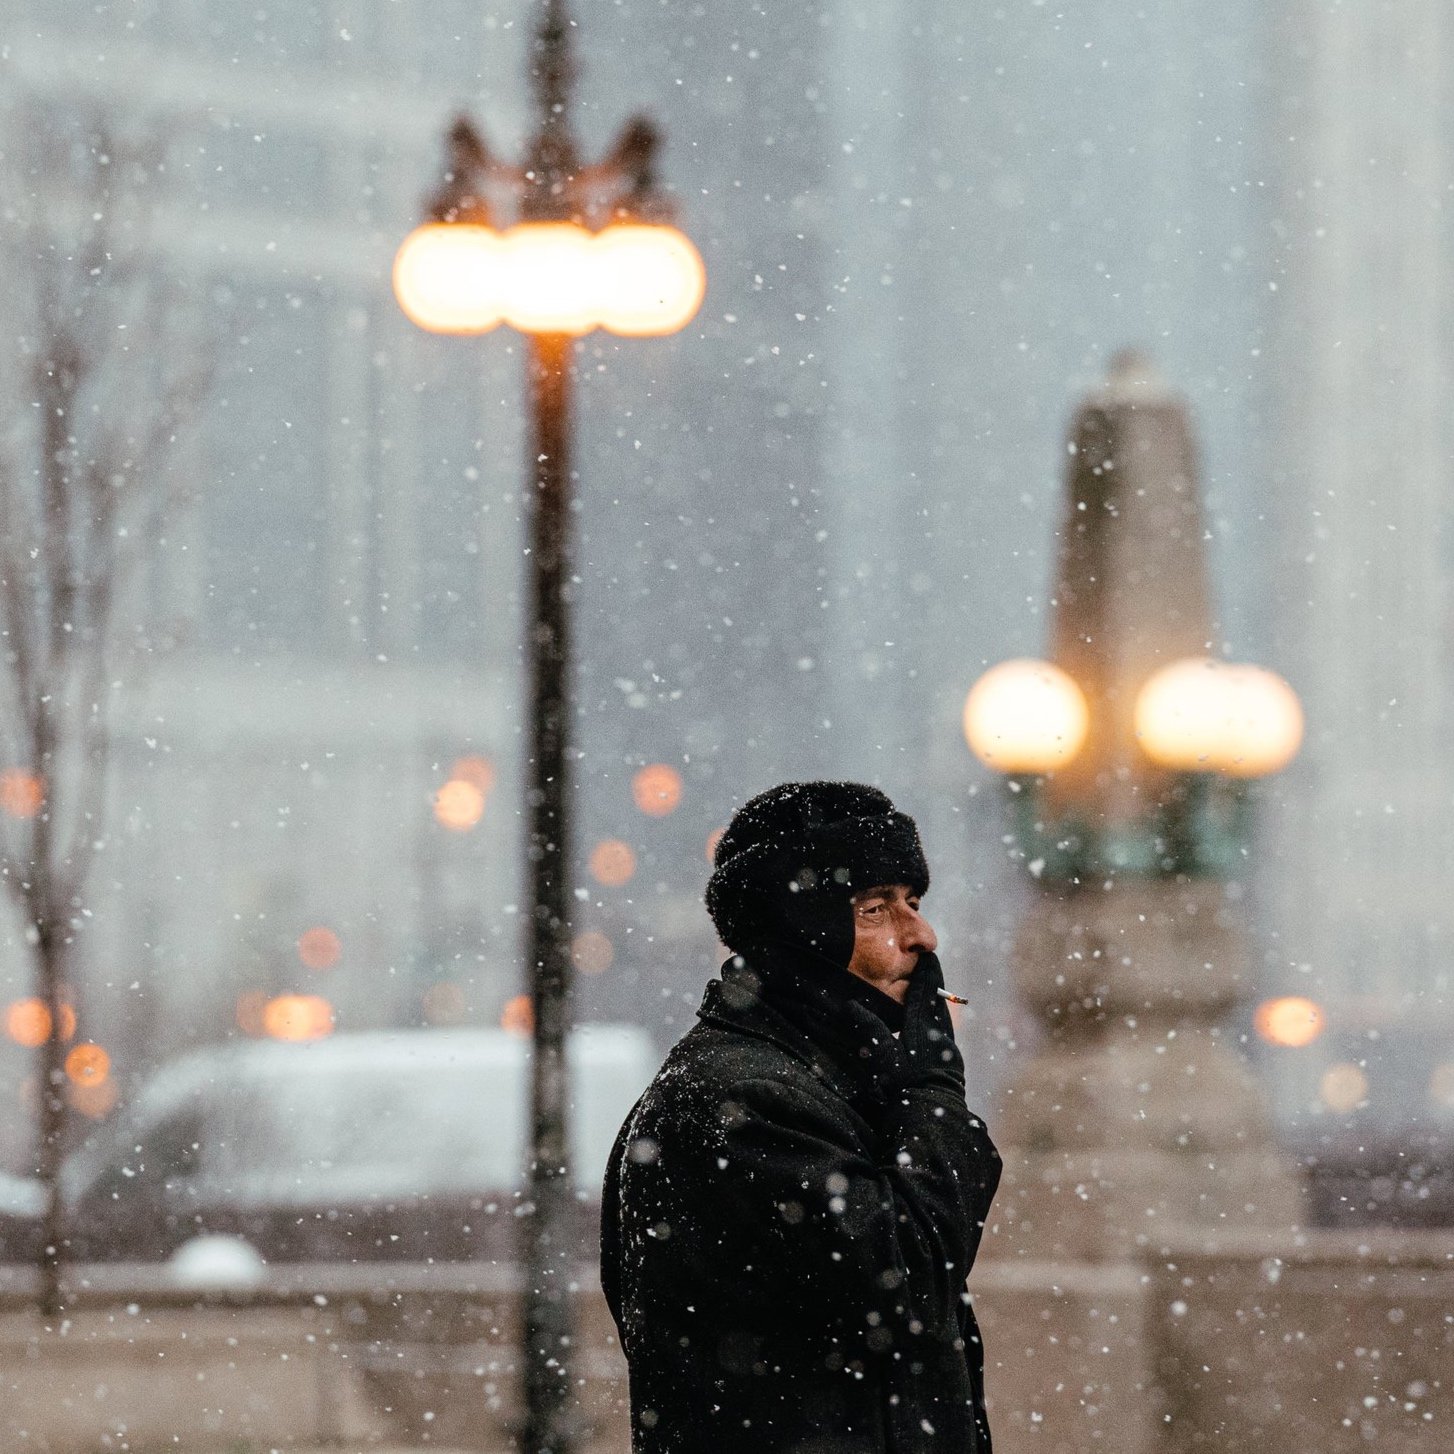 Chicago Winter Weather, The New York Times